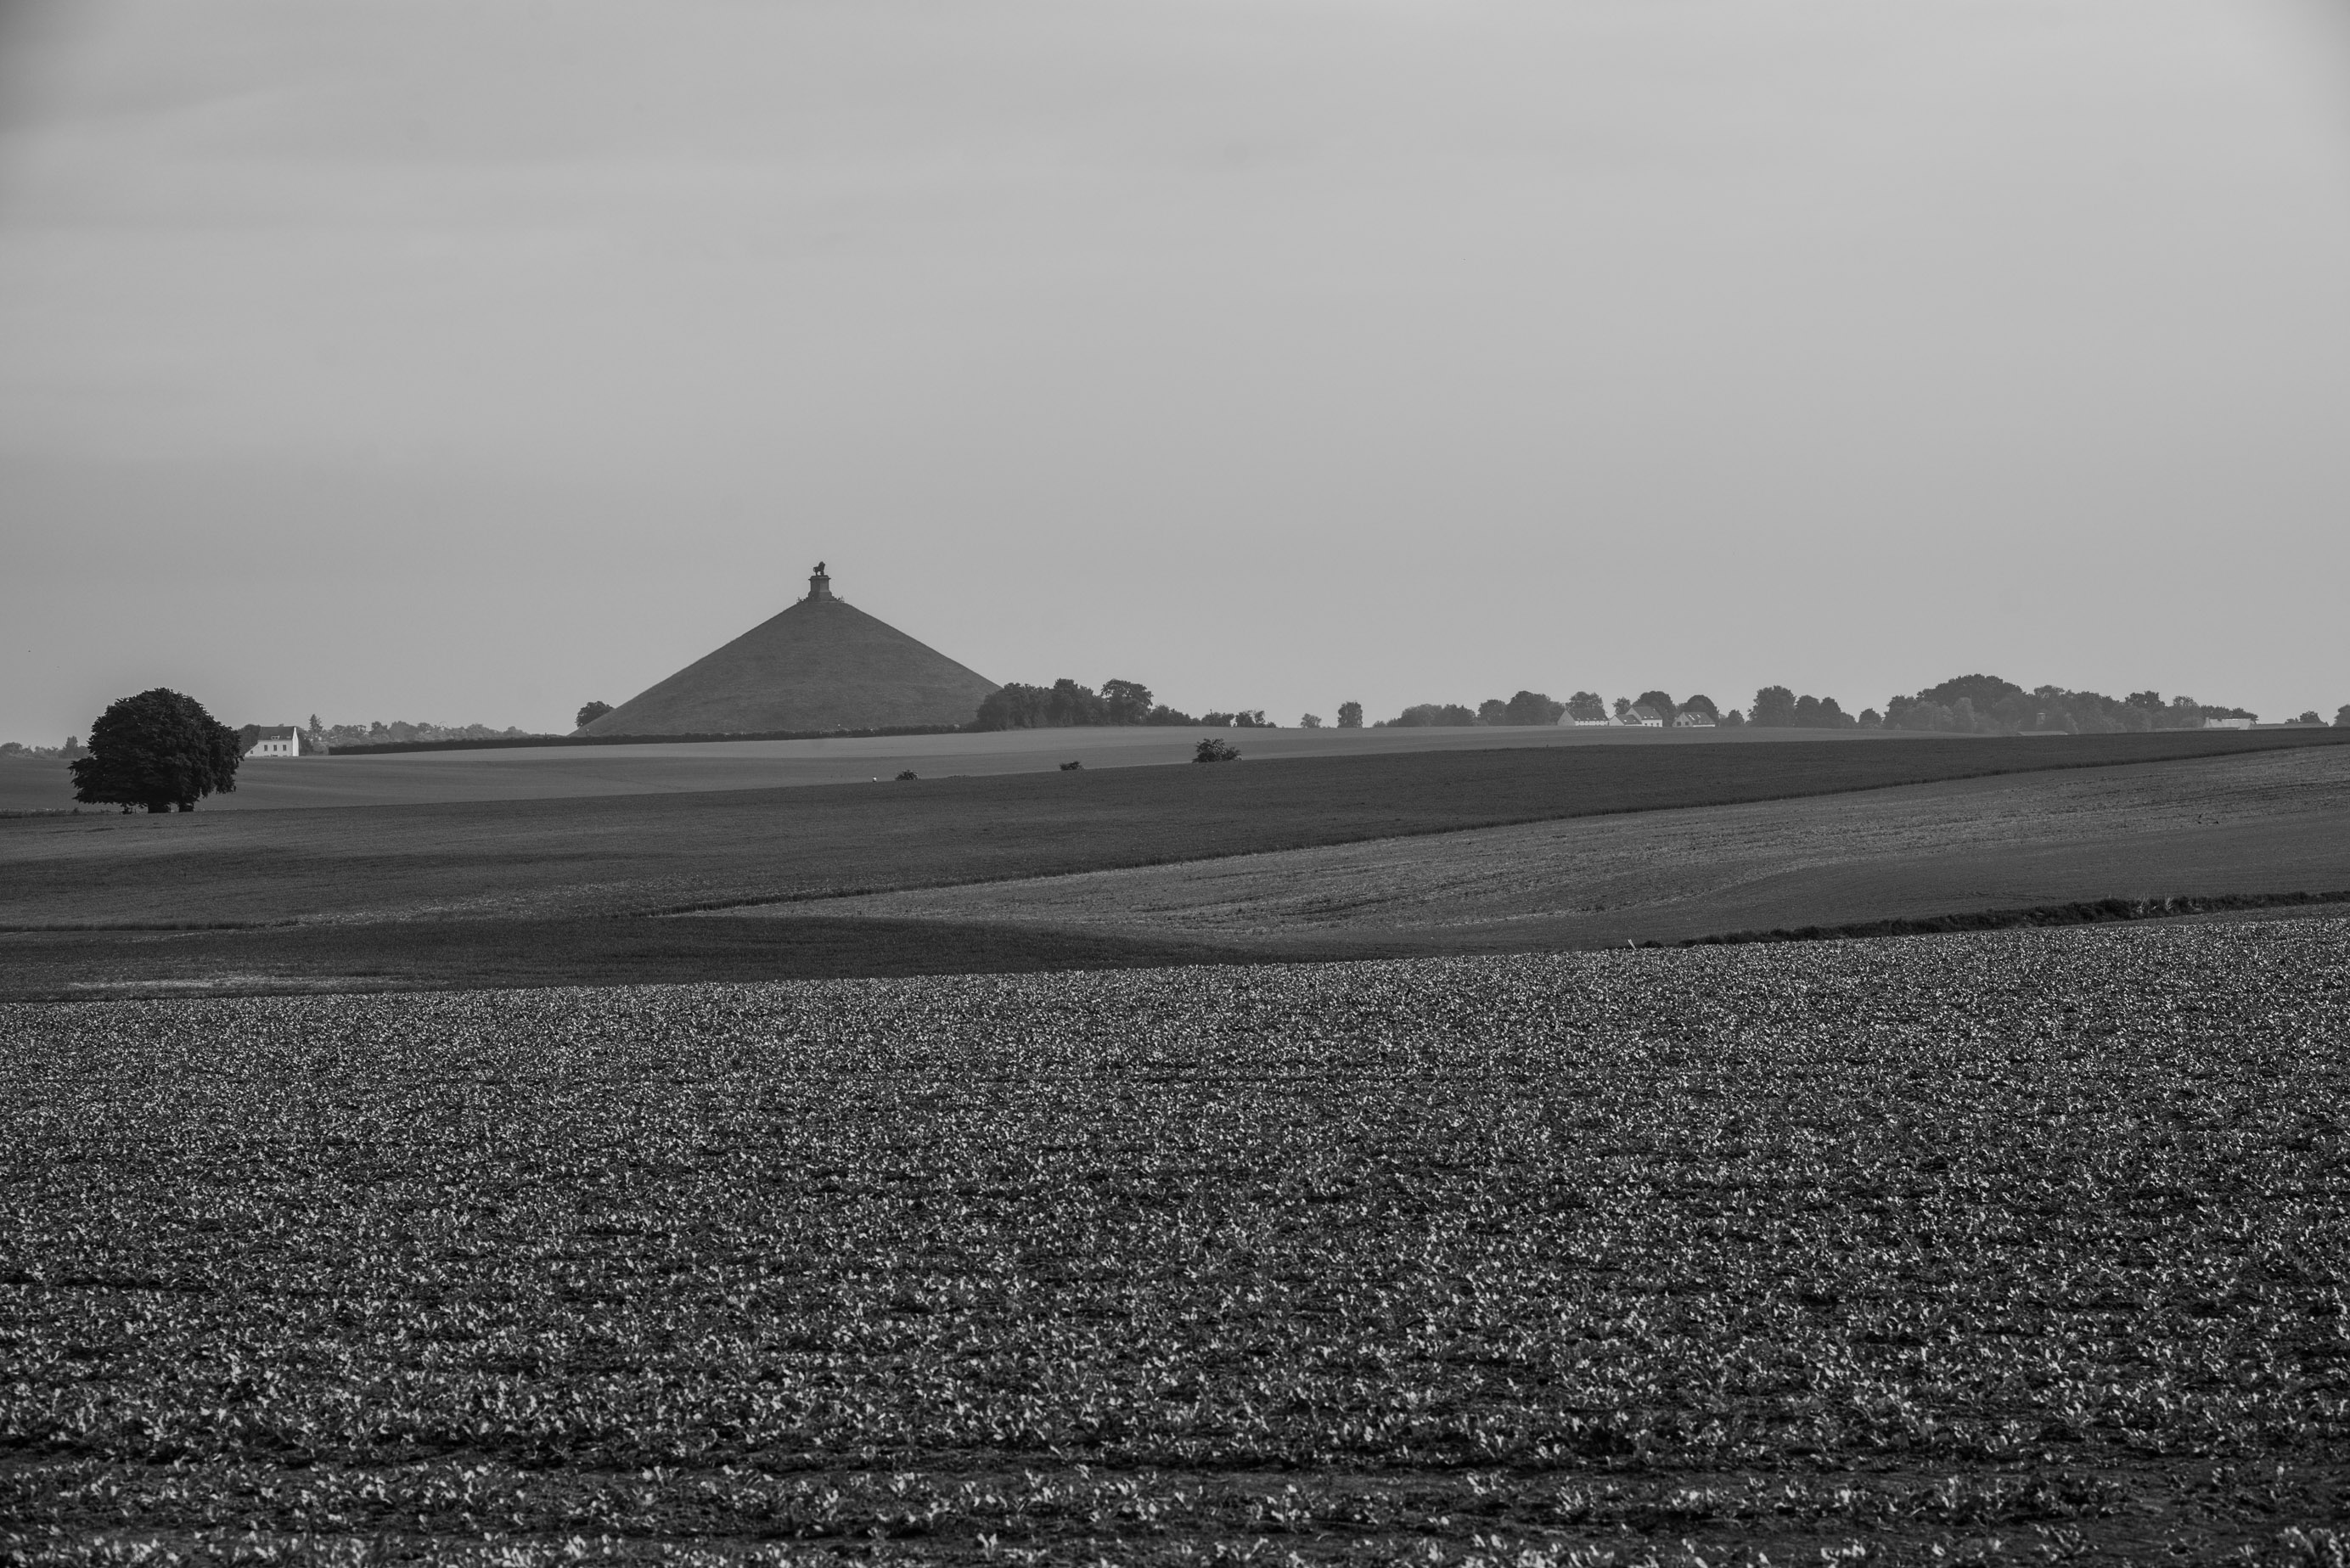 The Lion's Mound seen from the east